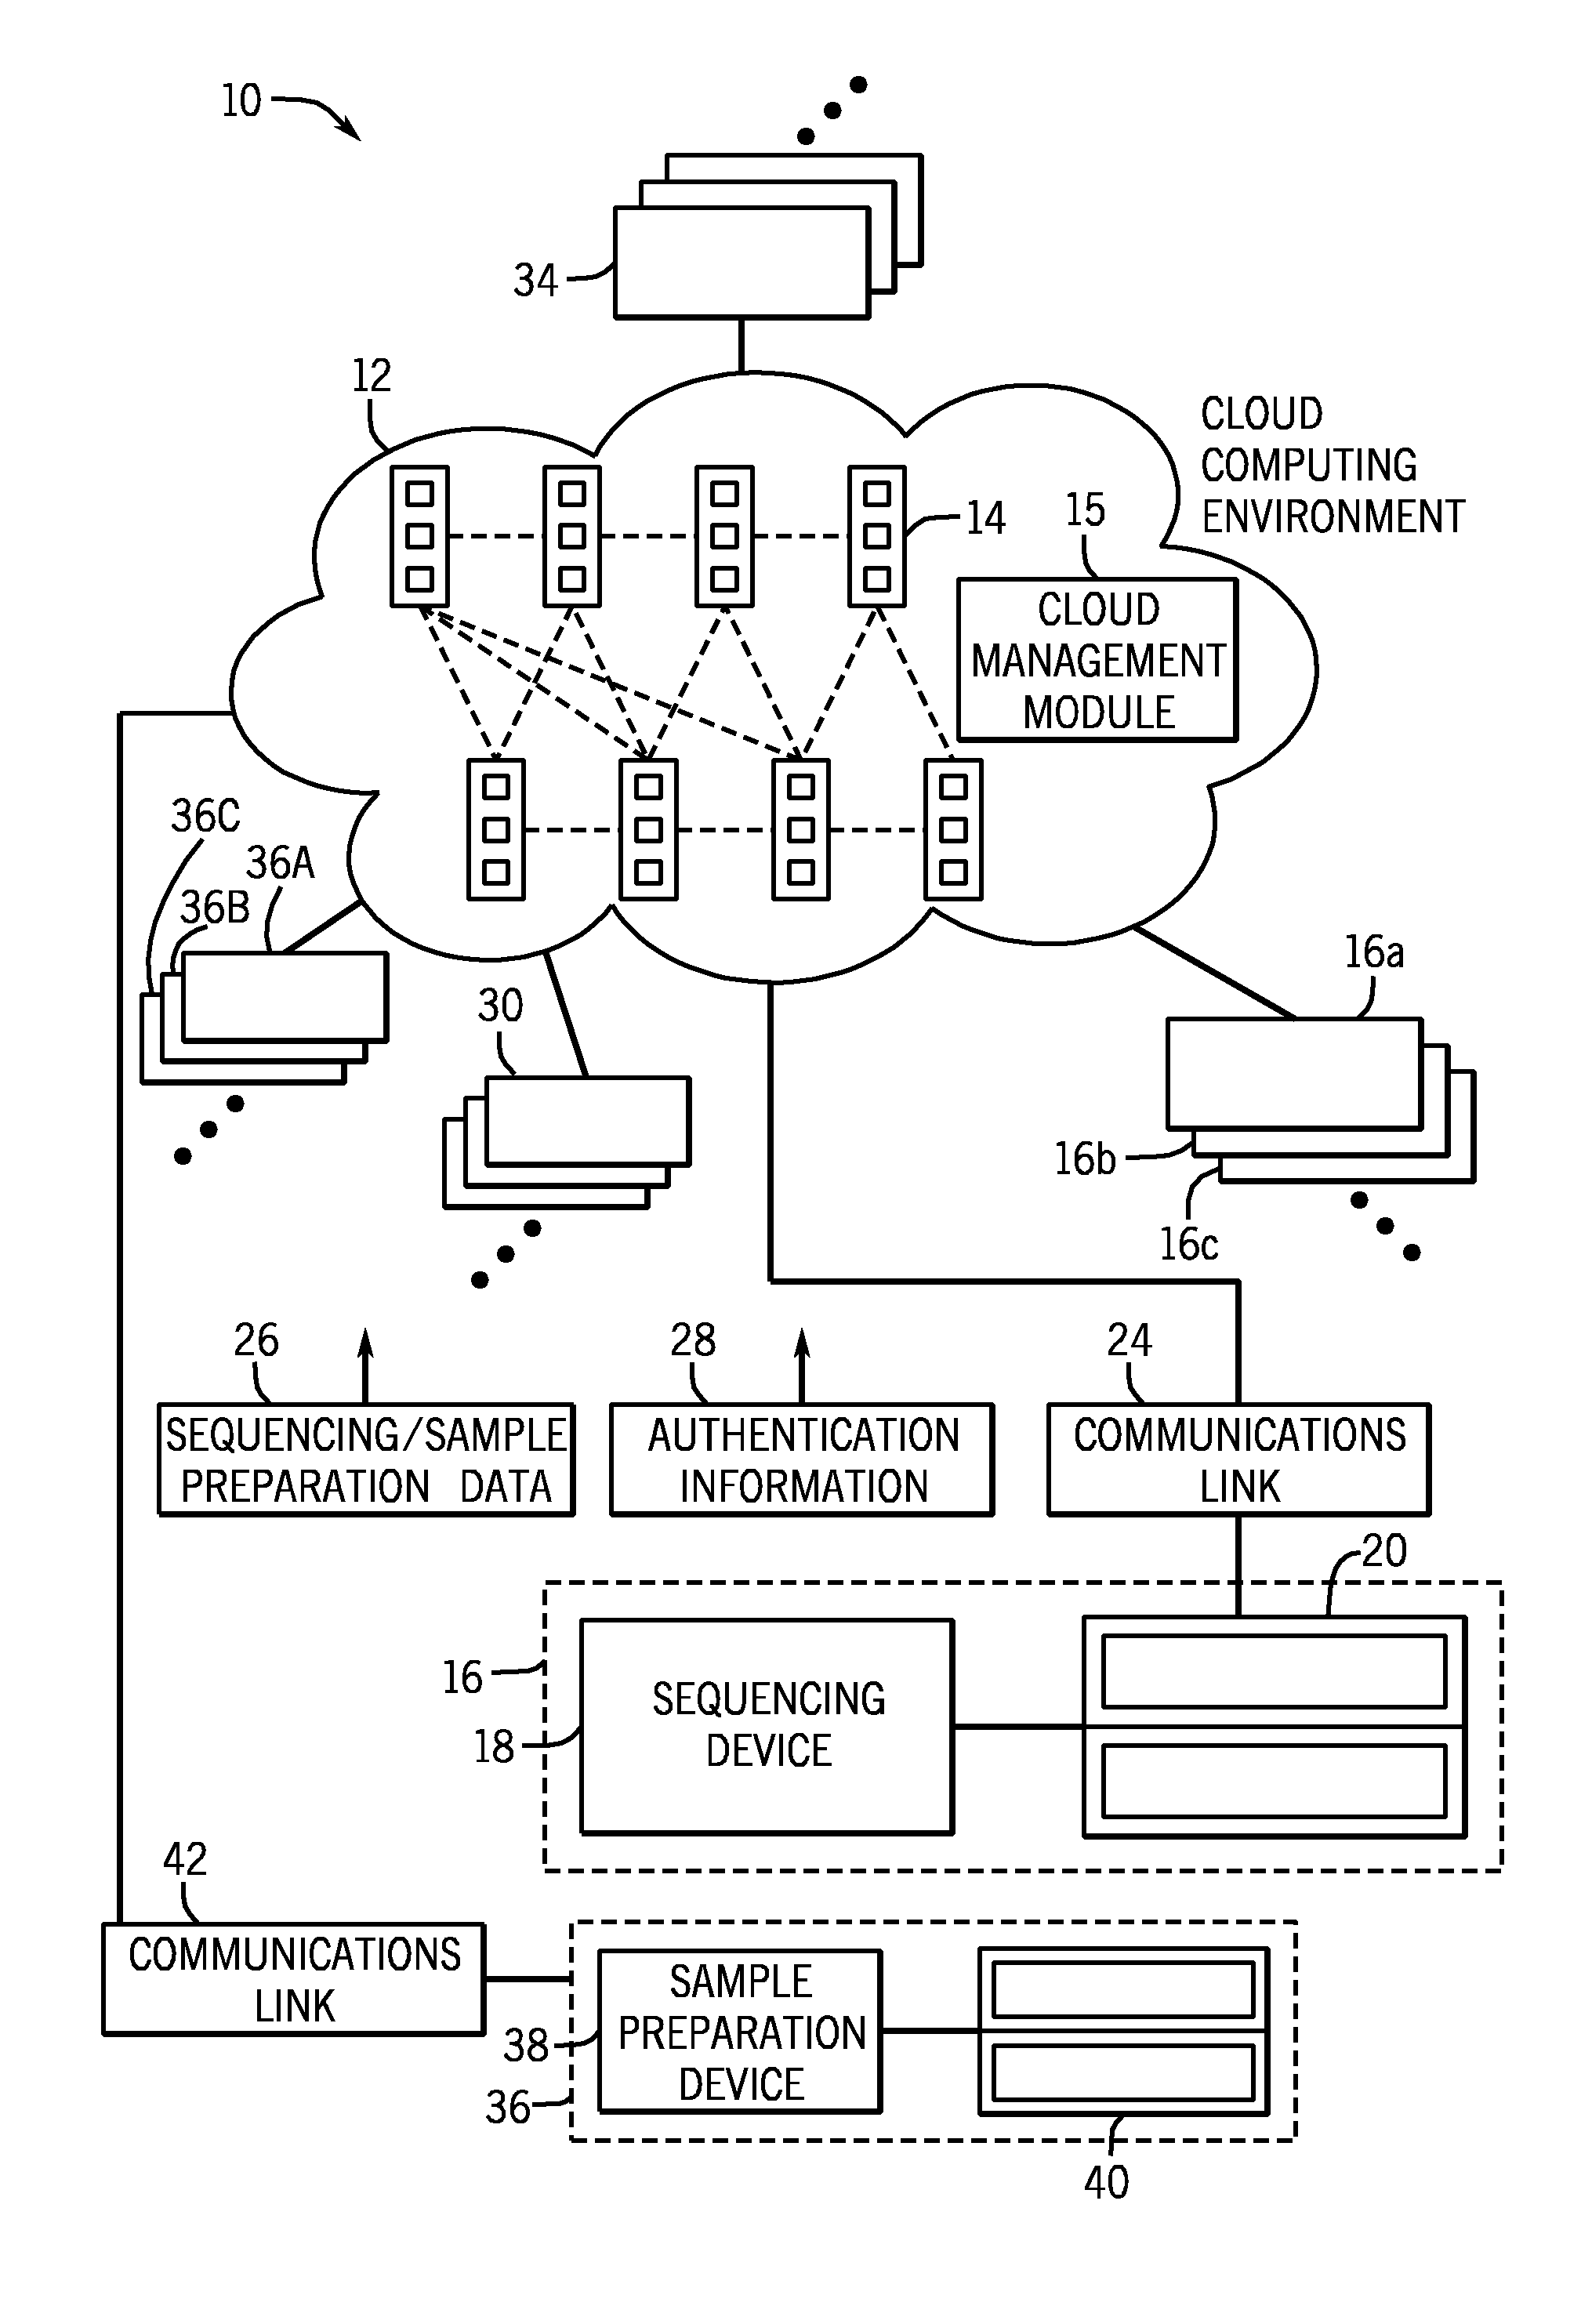 Methods and systems for using a cloud computing environment to share biological related data